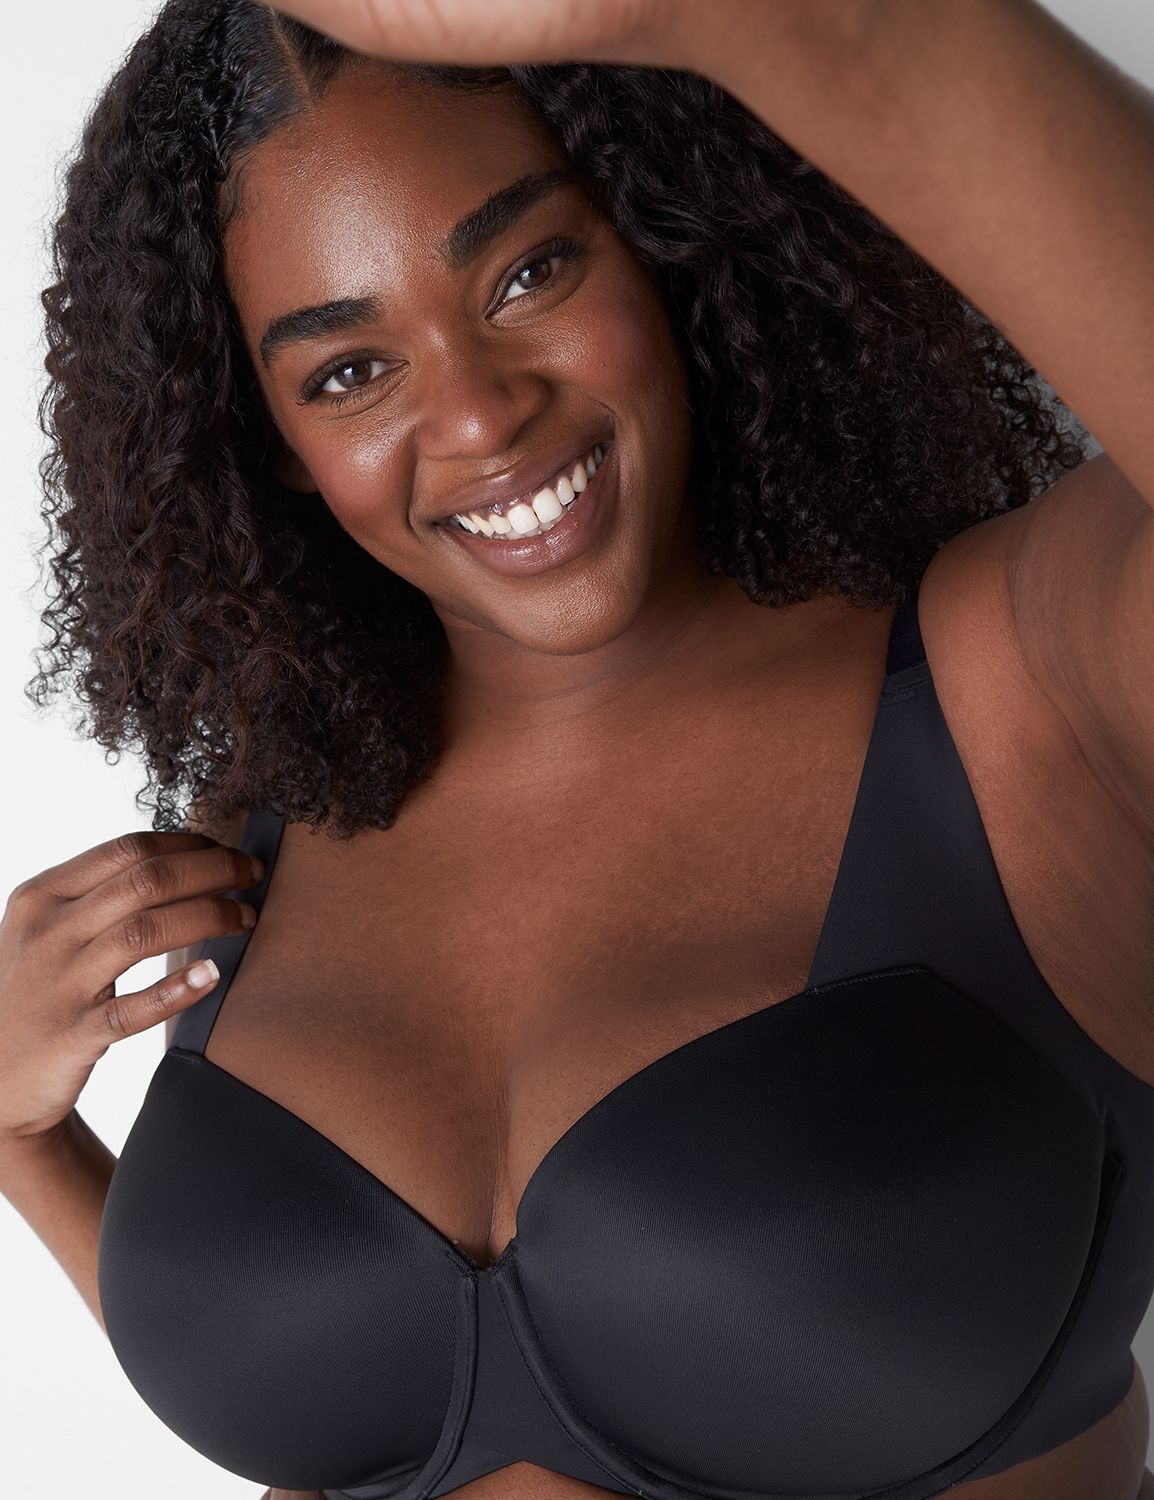 Totally Smooth Lightly Lined Balconette Bra